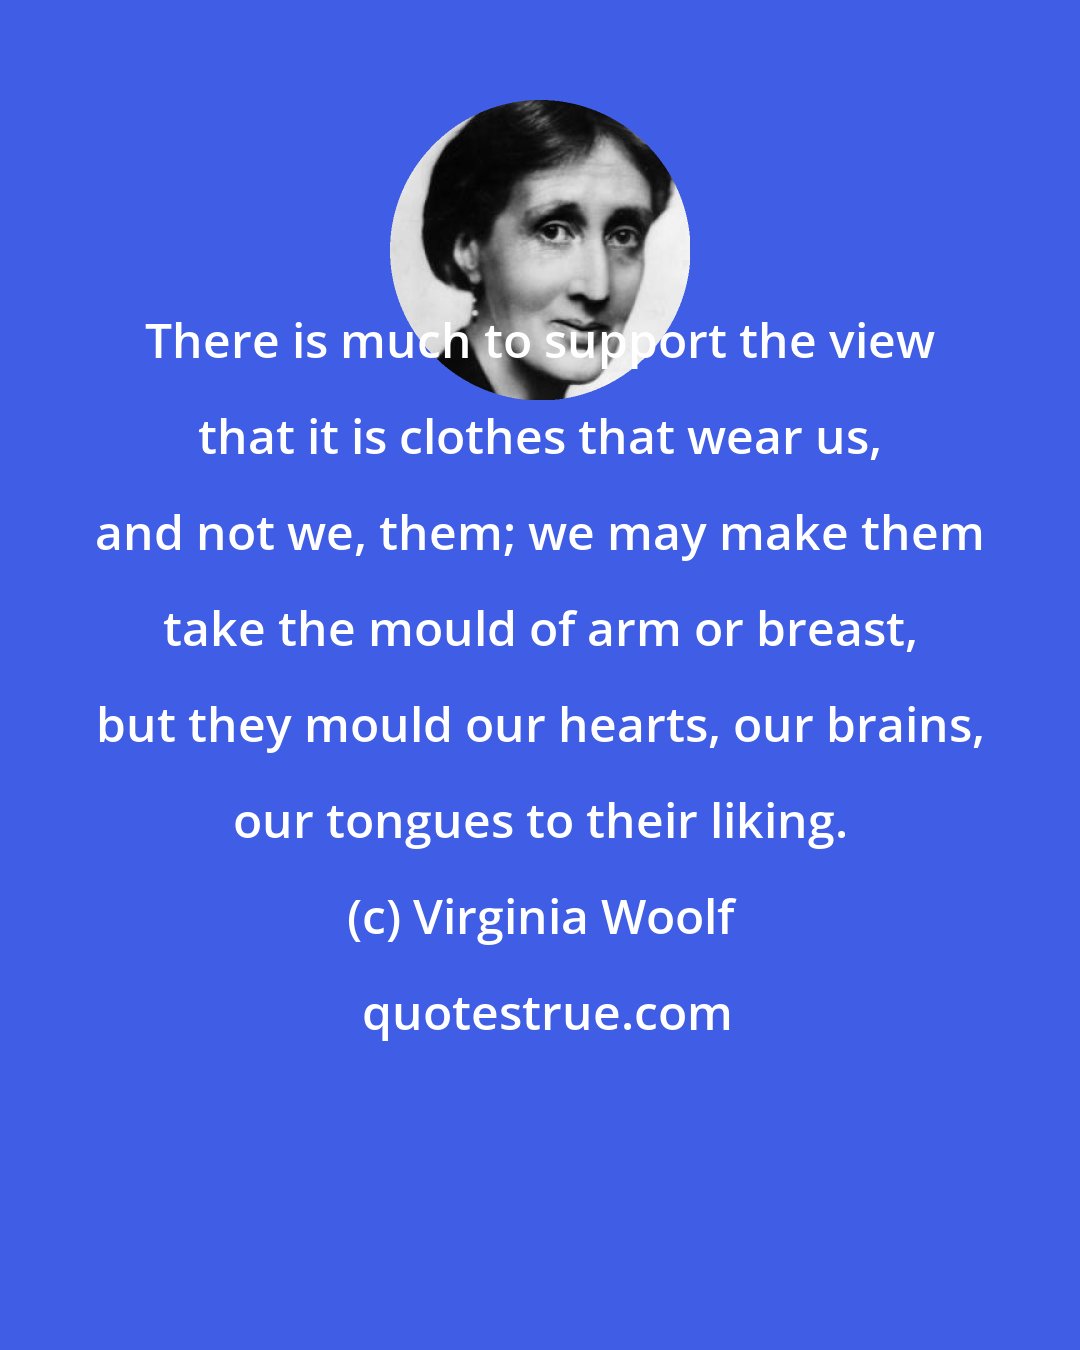 Virginia Woolf: There is much to support the view that it is clothes that wear us, and not we, them; we may make them take the mould of arm or breast, but they mould our hearts, our brains, our tongues to their liking.